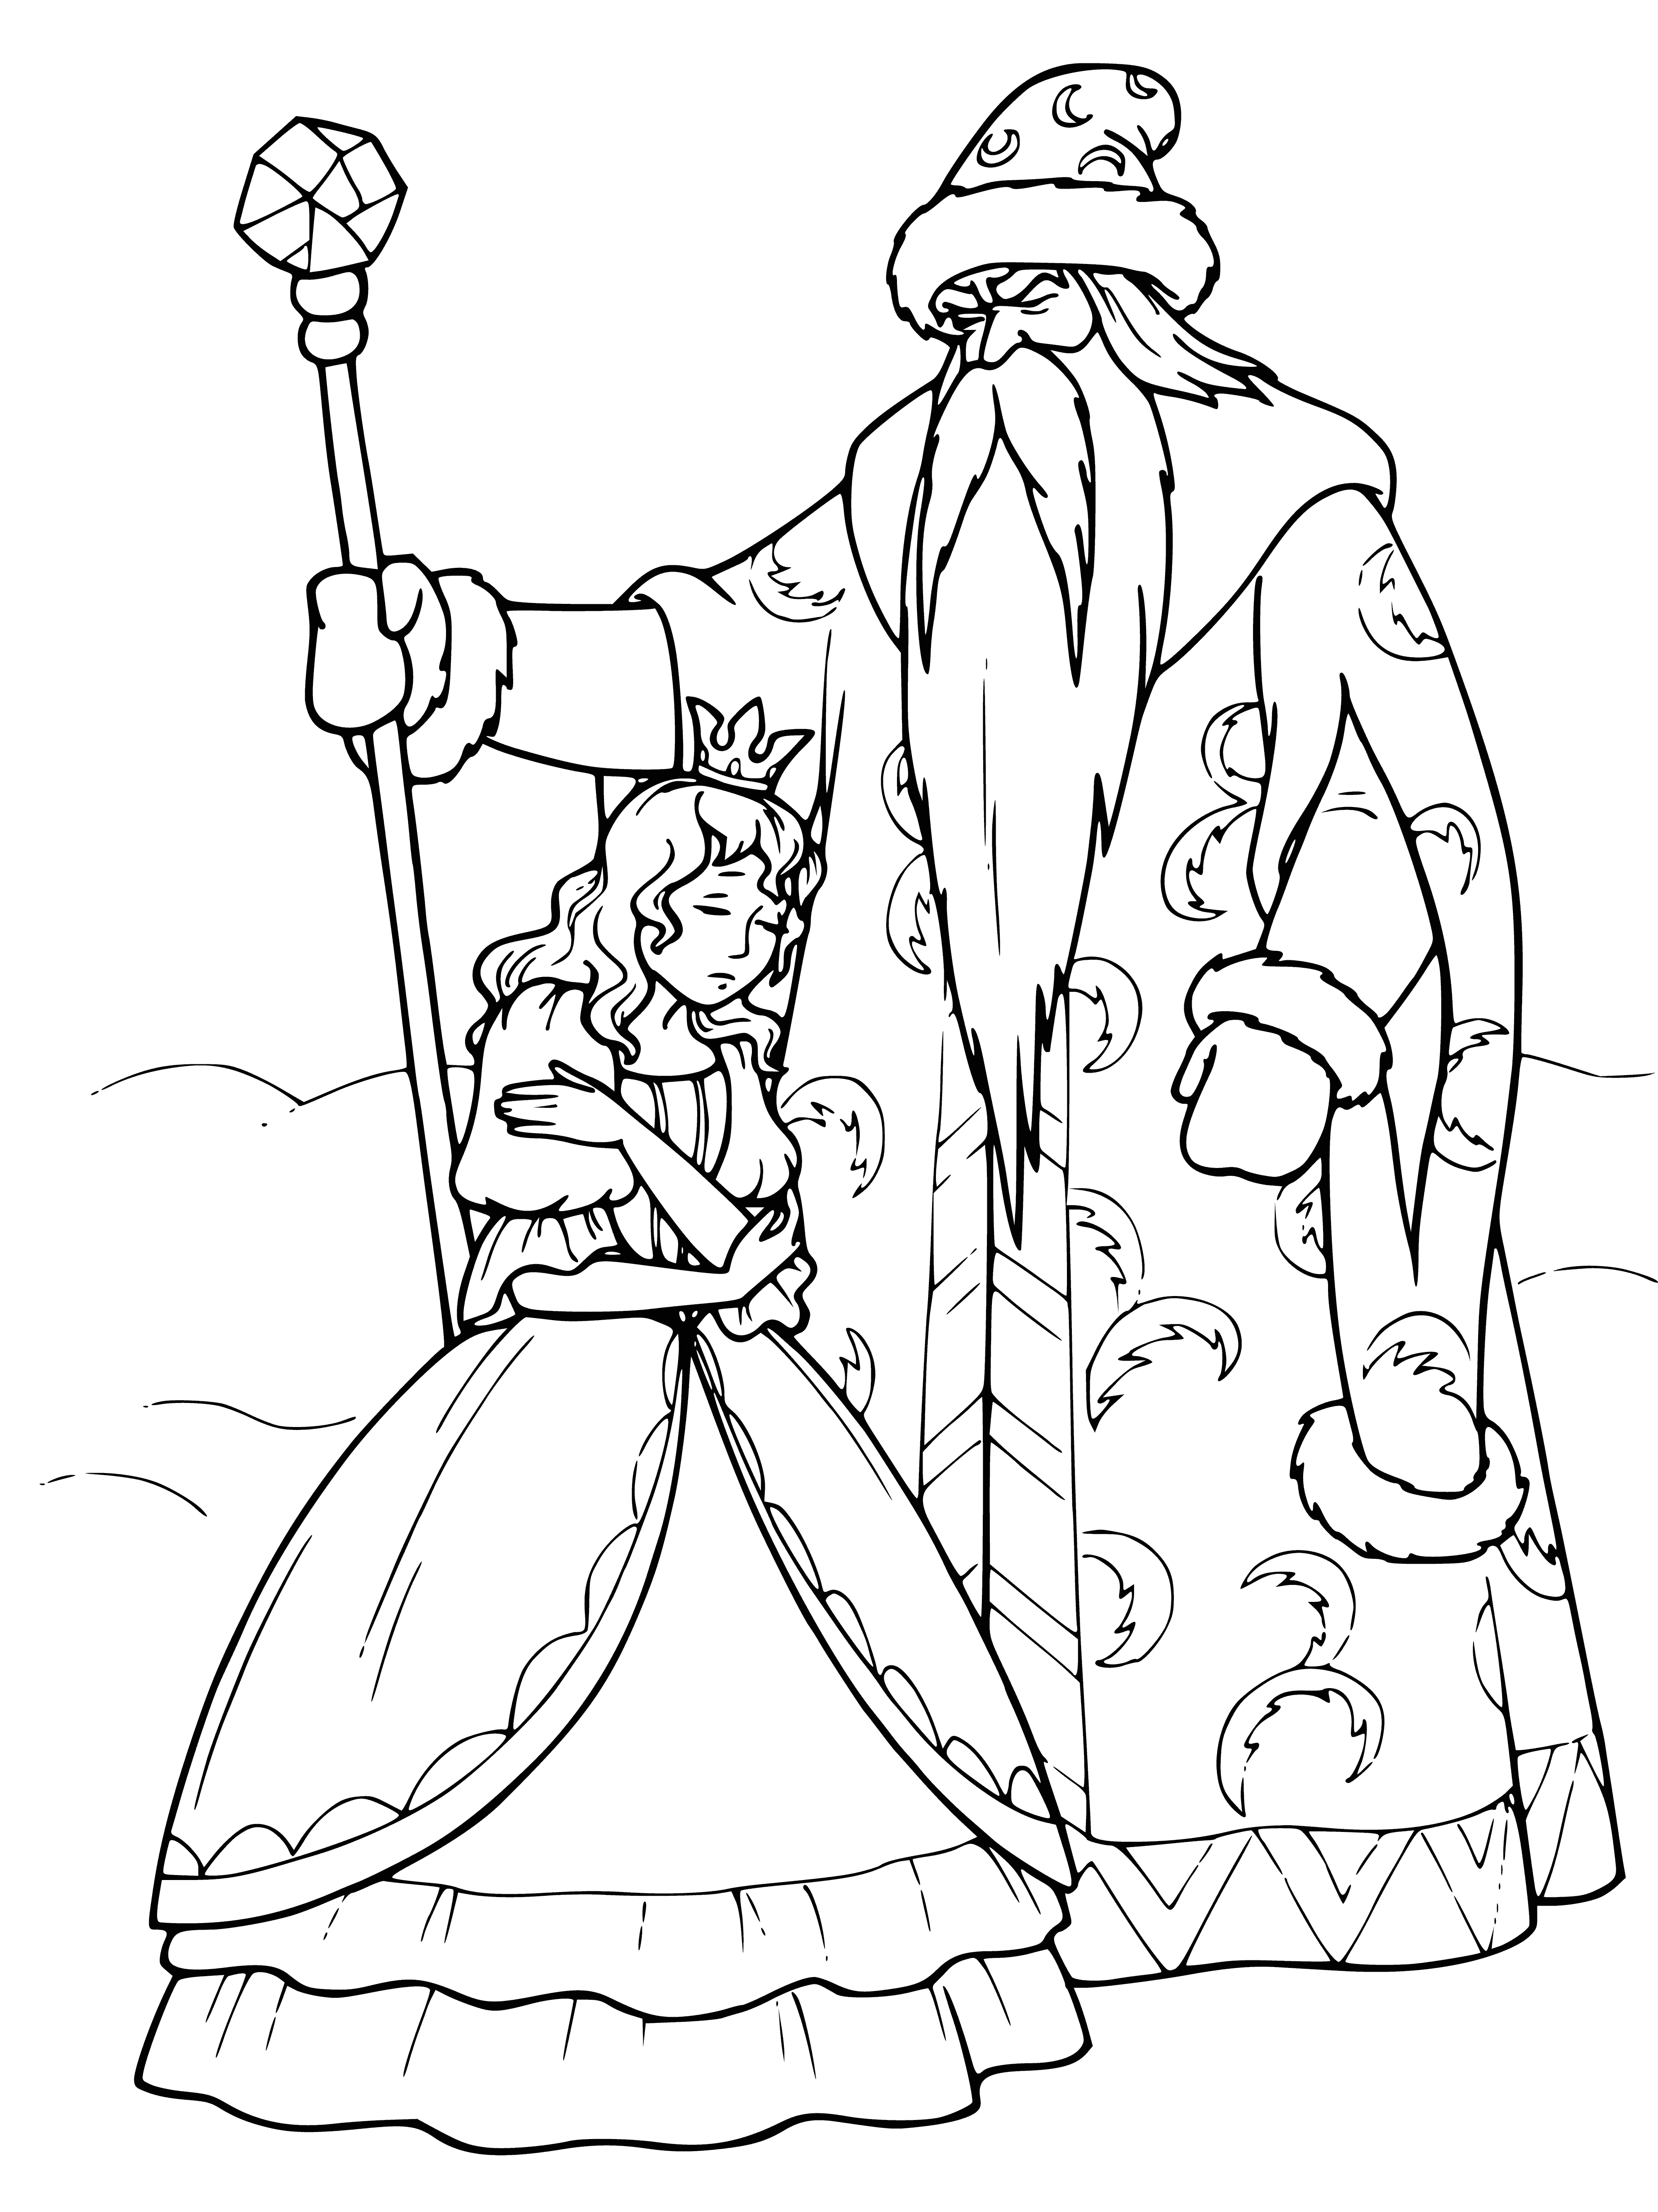 coloring page: Two men sit intently studying a book, in an atmosphere of seriousness.